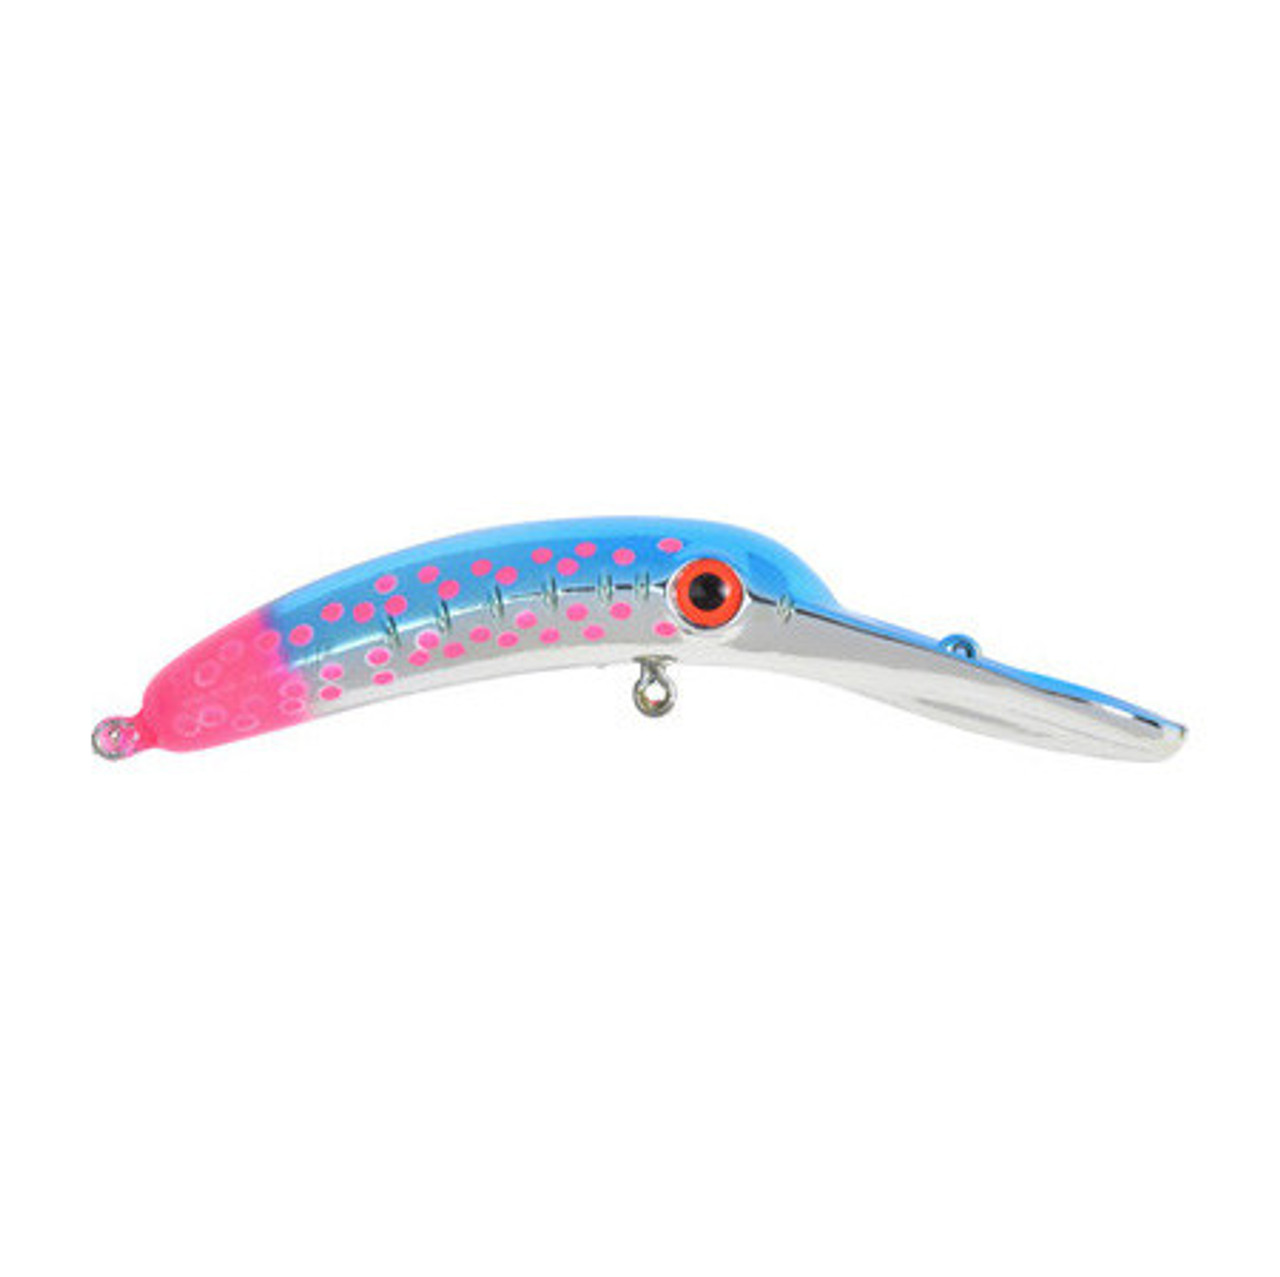 Hot-Sale Soft Lure Kit at 3+1 Jig Head and Soft Body 9cm shad